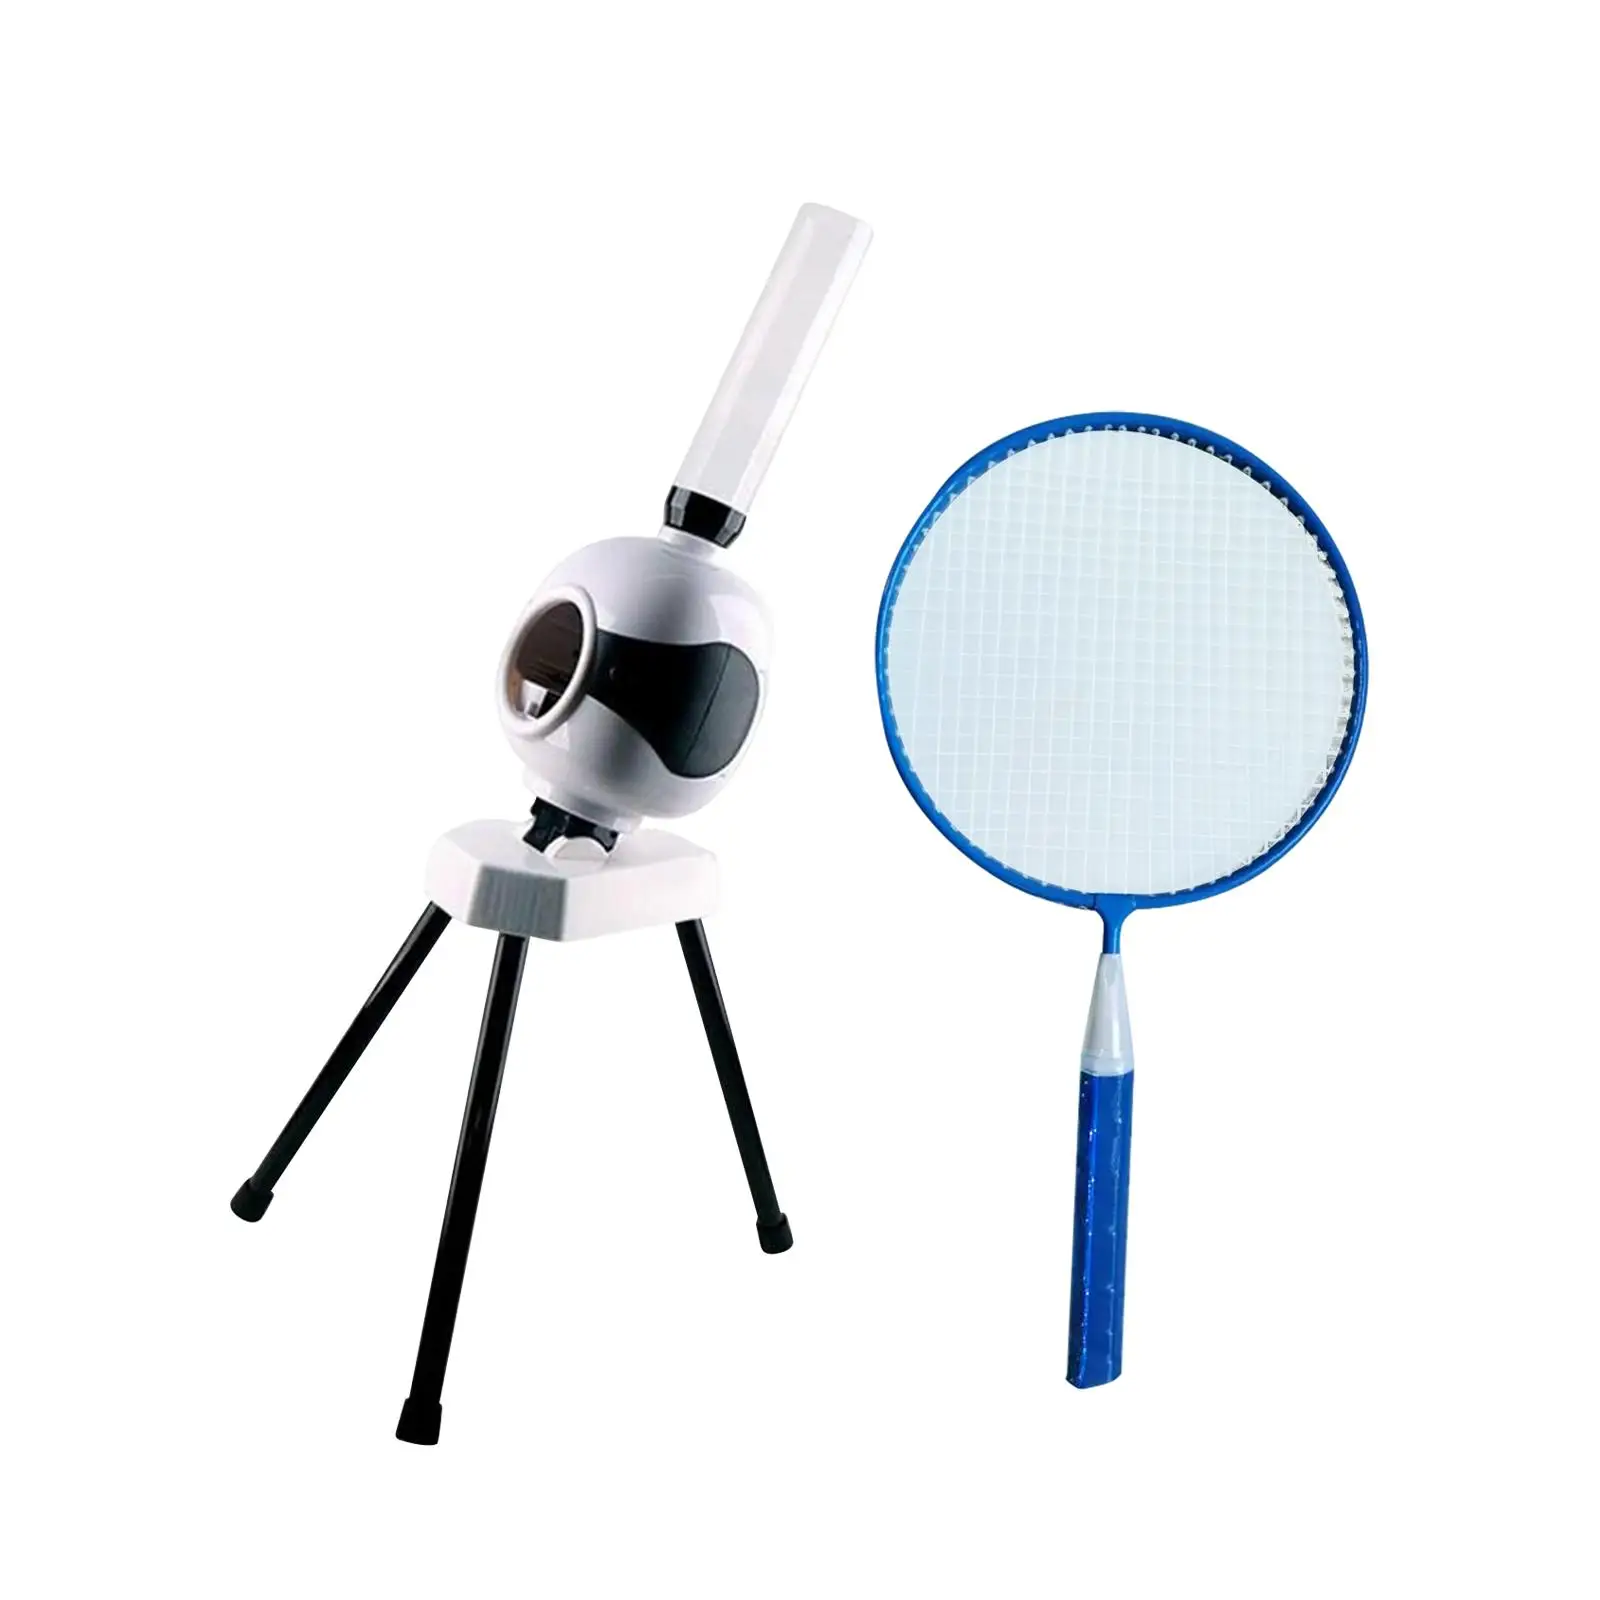 Badminton Ball Tosser for Self Play Portable Badminton Ball Launcher Badminton Ball Pitching Tool for All Levels Adults Coaches